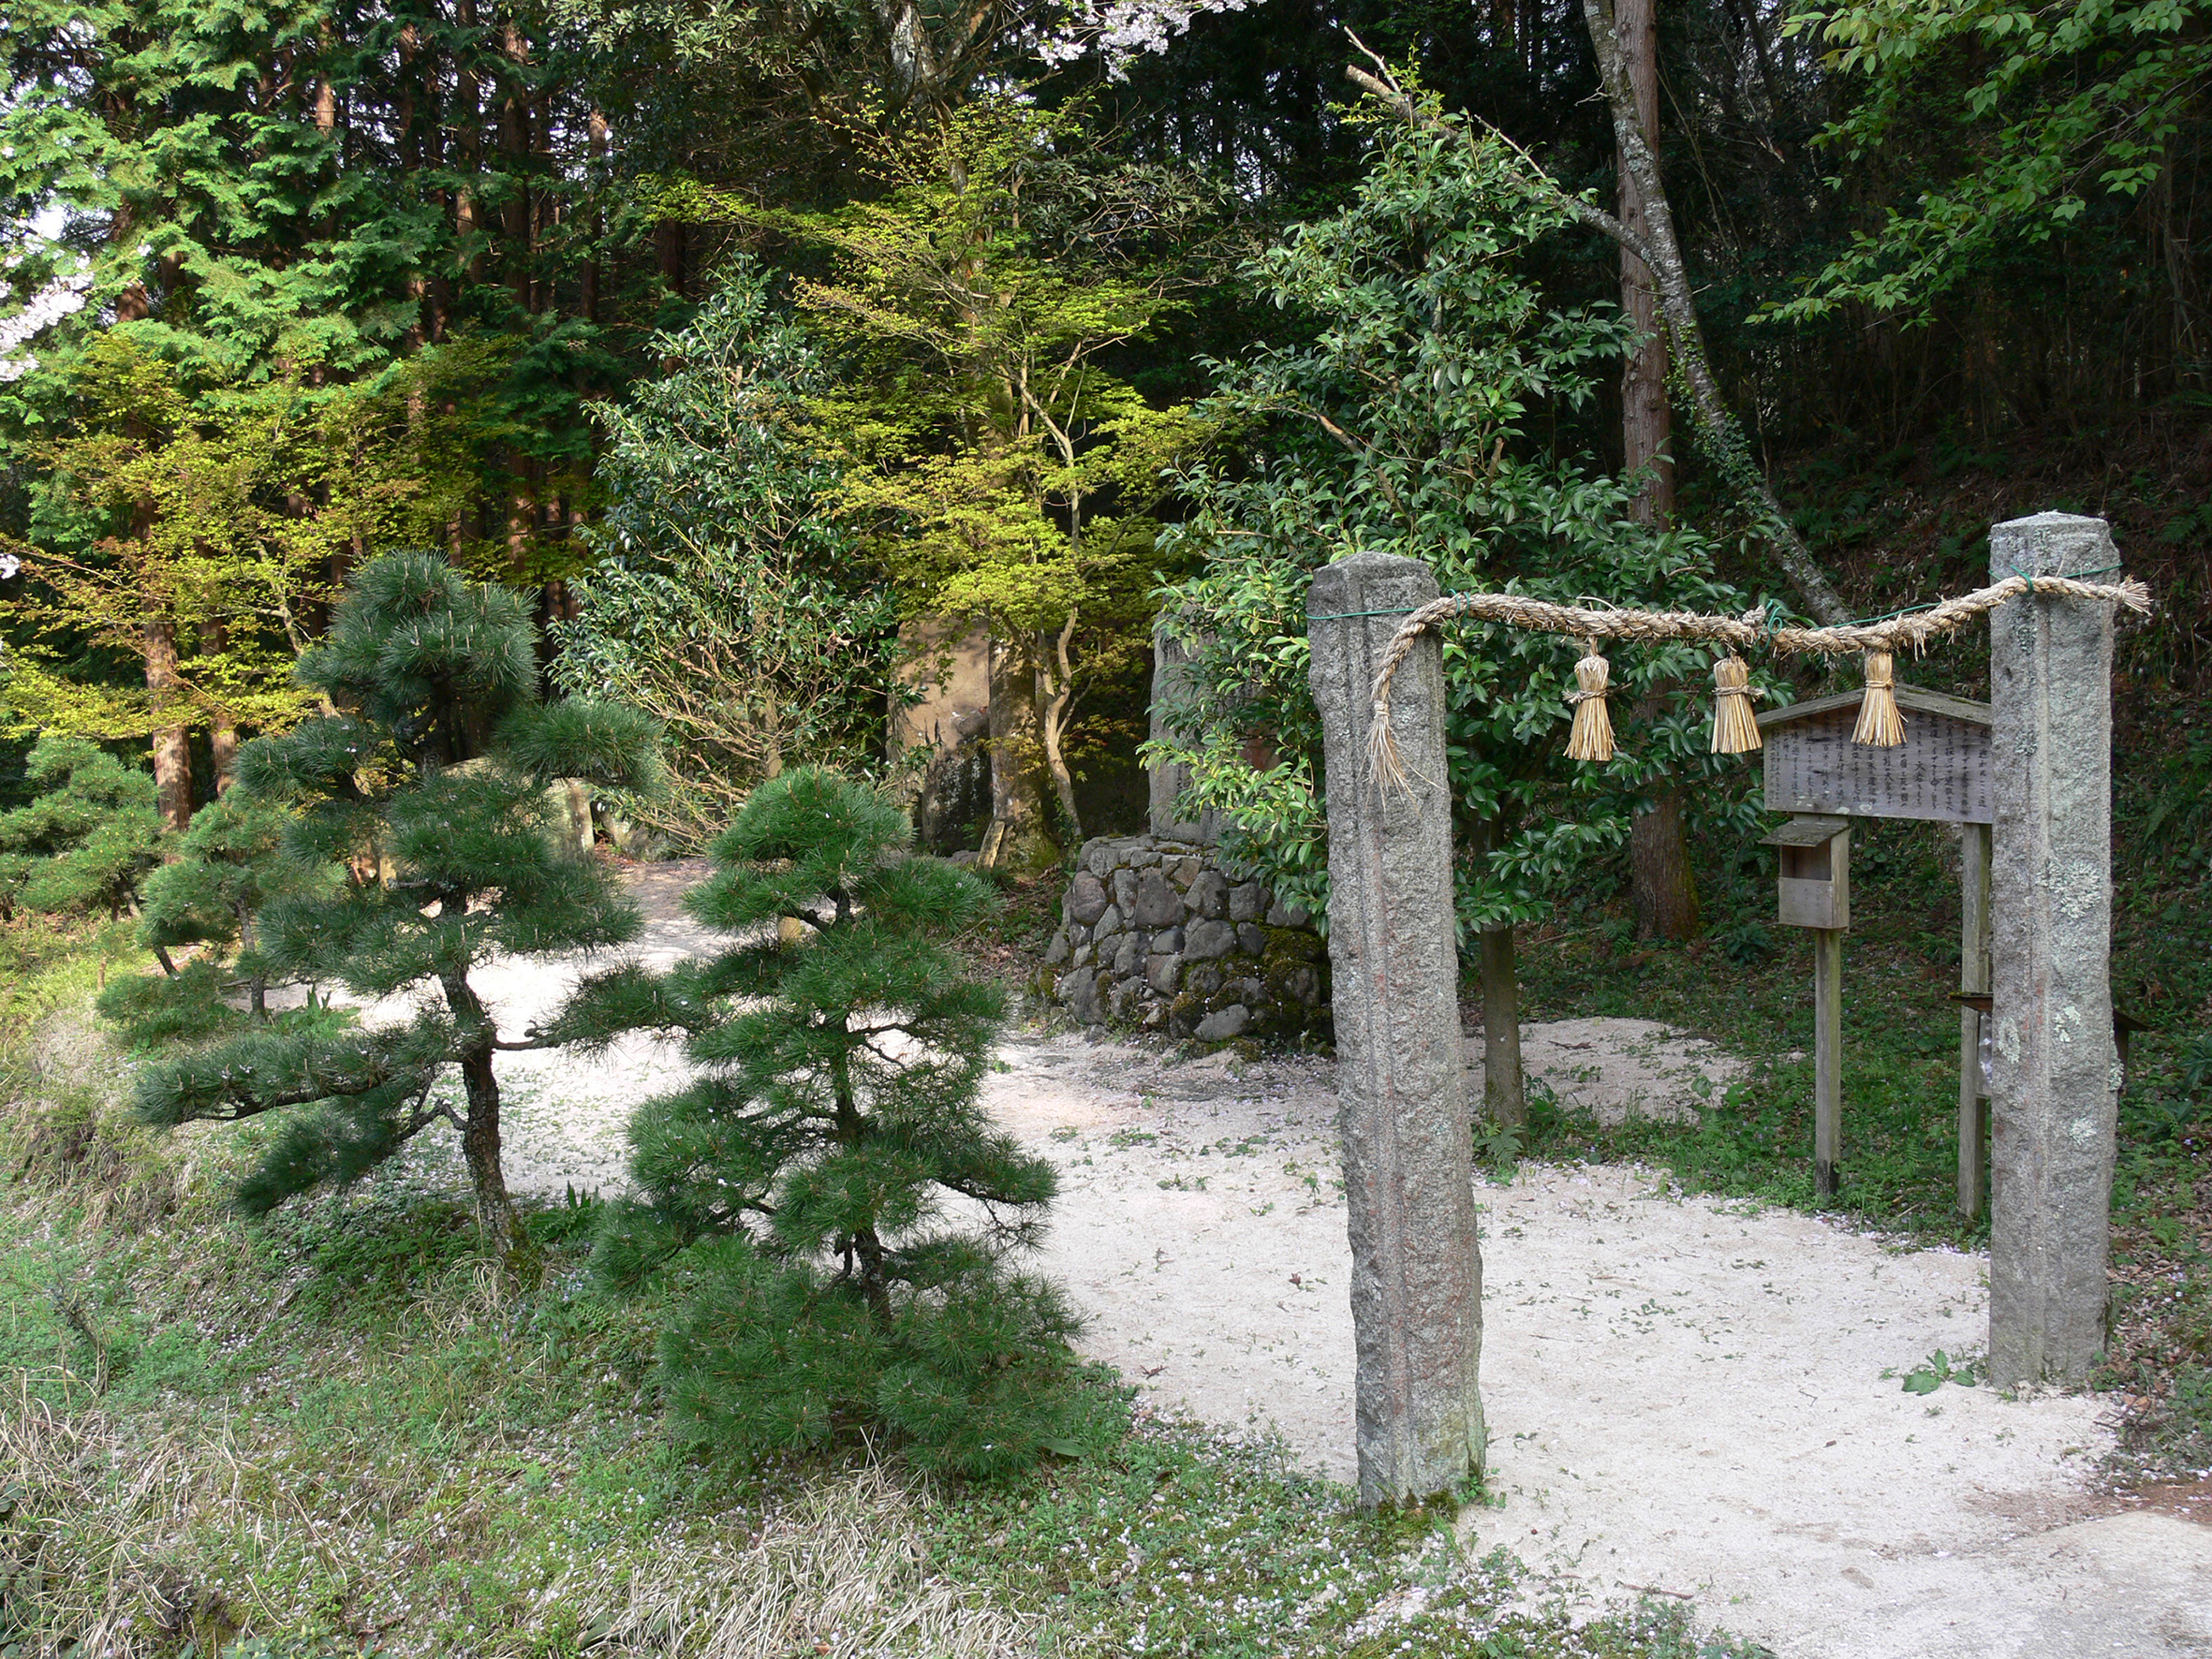 Ihuya Hill in Matsue, Shimane Prefecture.  Is this the exit from Yomi no Kuni?